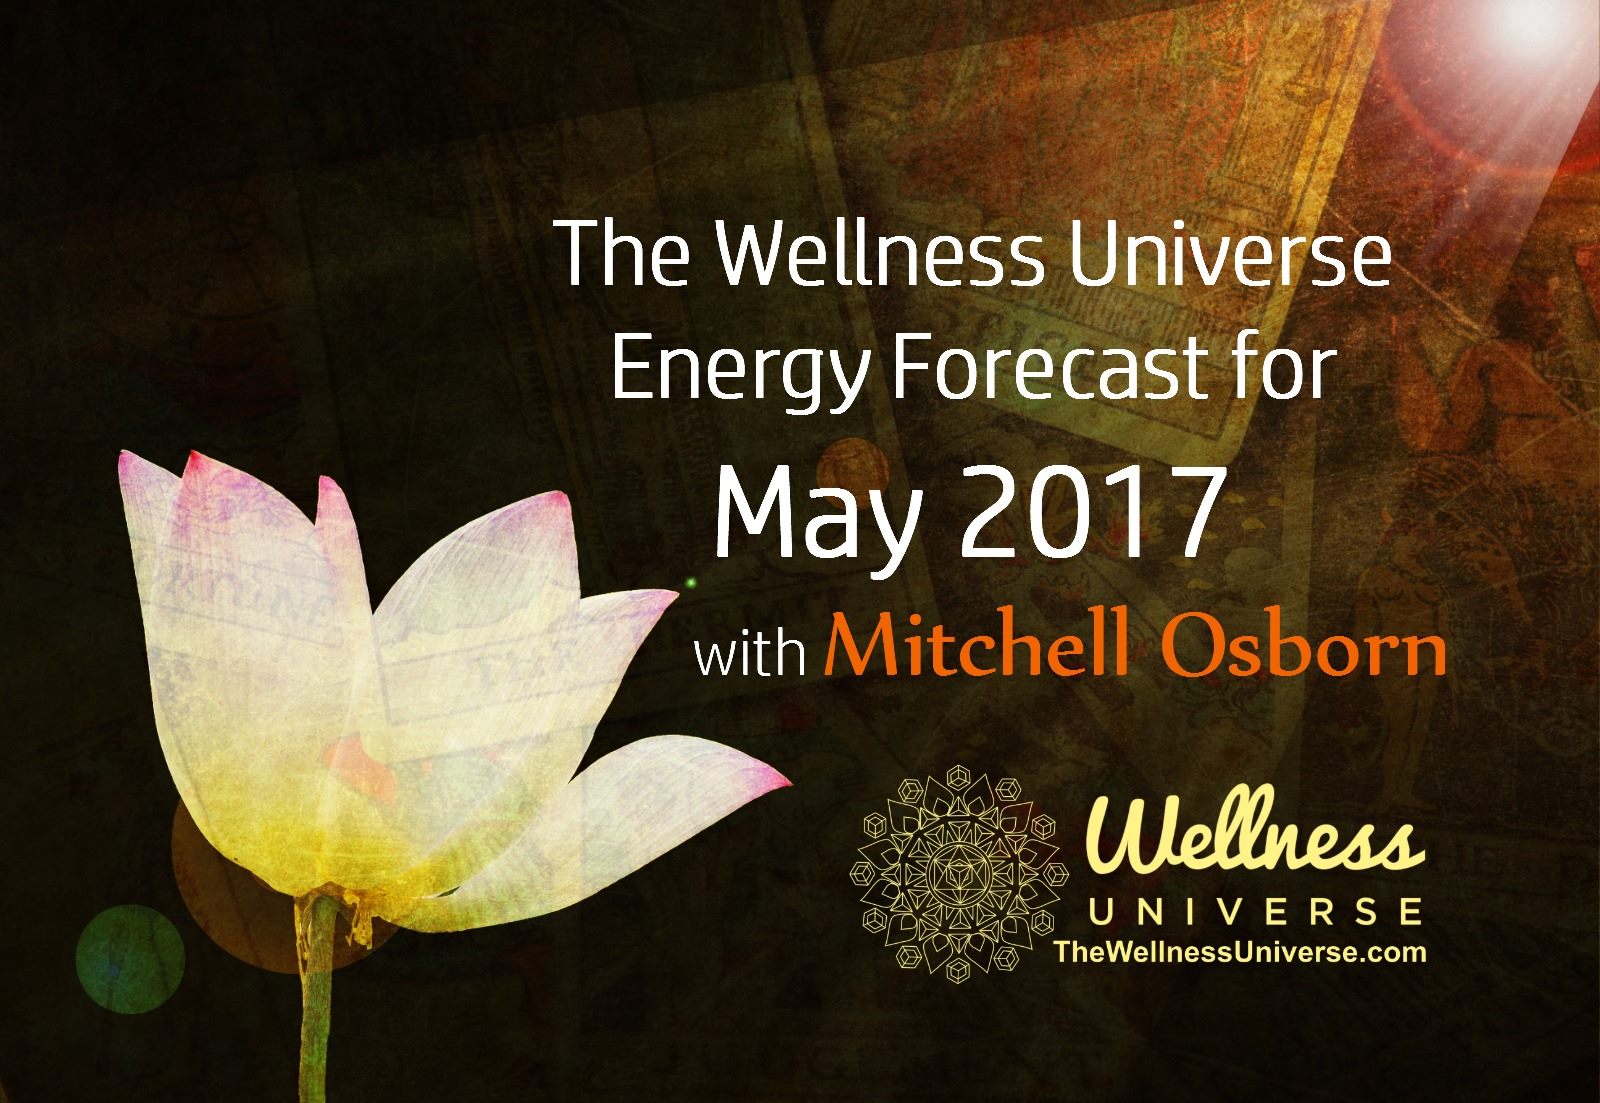 Energy Forecast for May with Mitchell Osborn